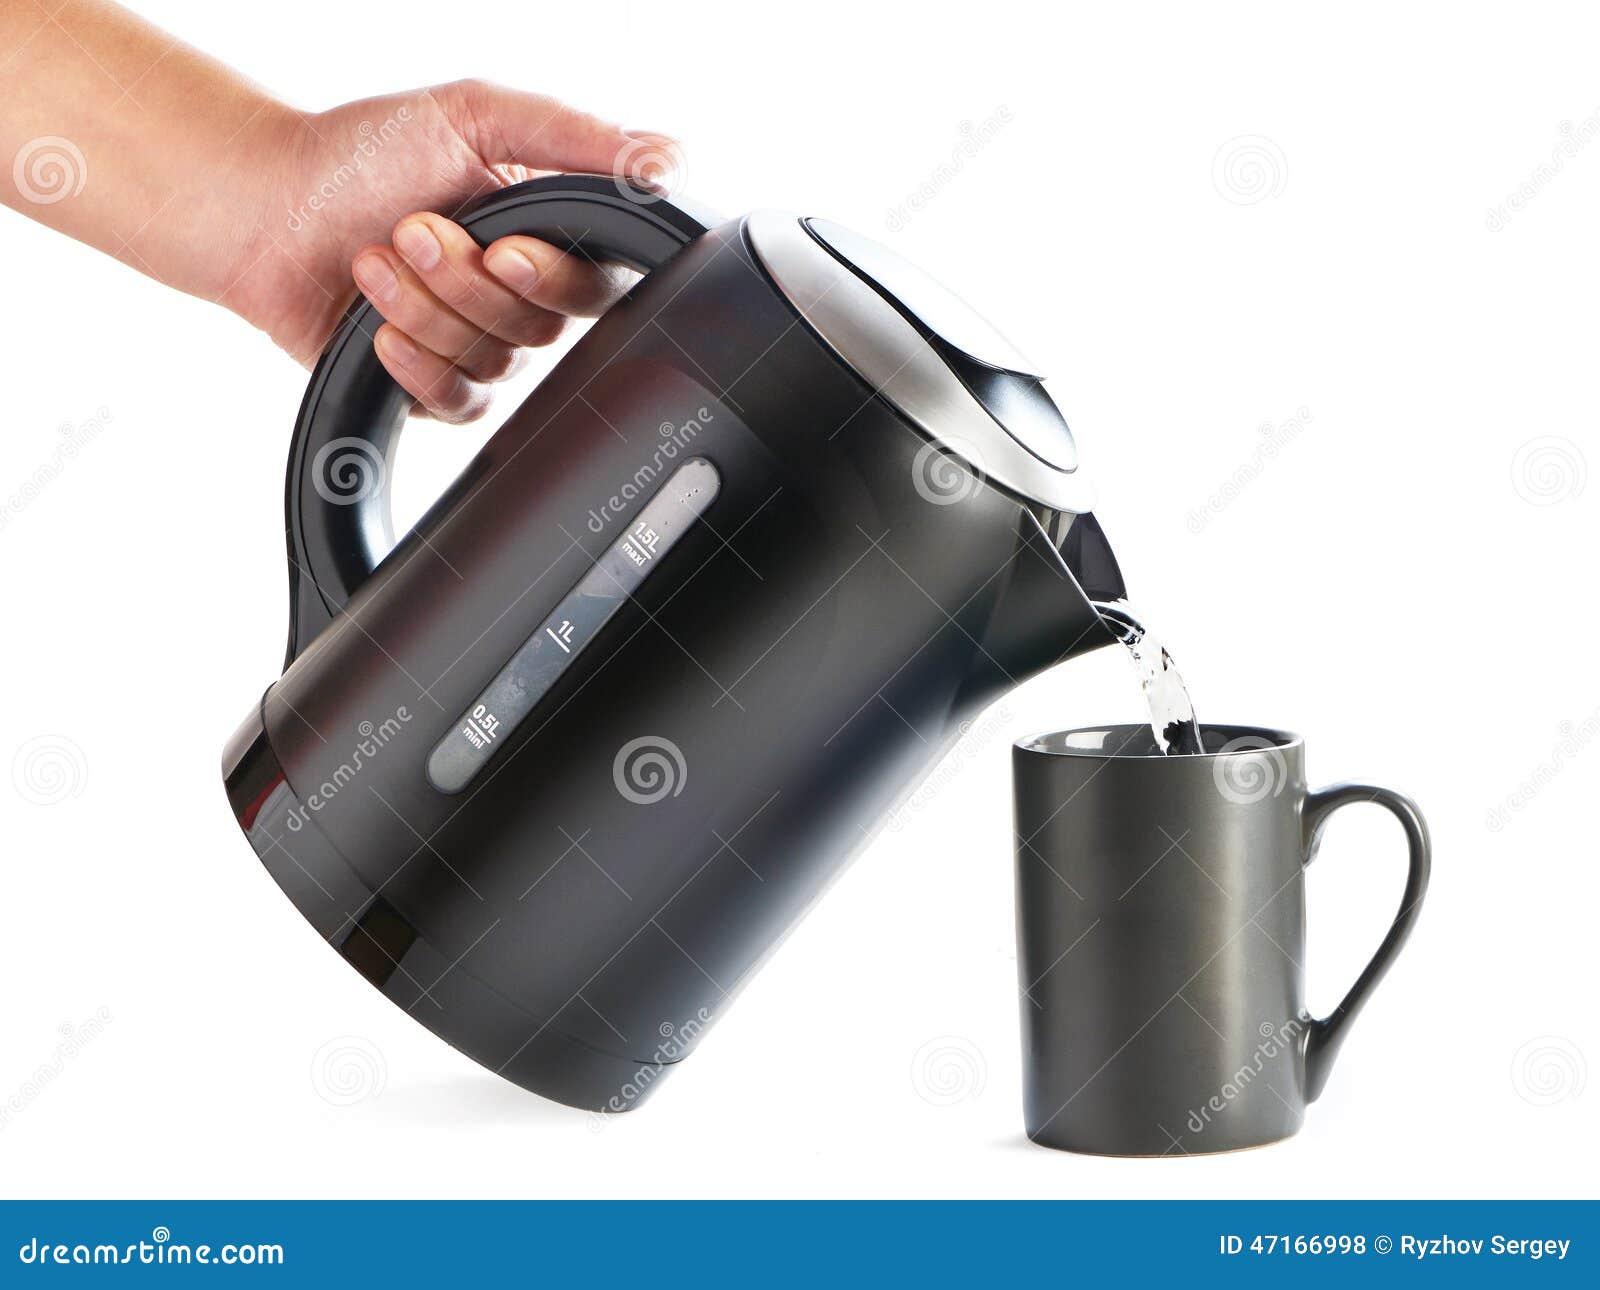 https://thumbs.dreamstime.com/z/modern-kettle-pouring-water-cup-isolated-white-background-47166998.jpg